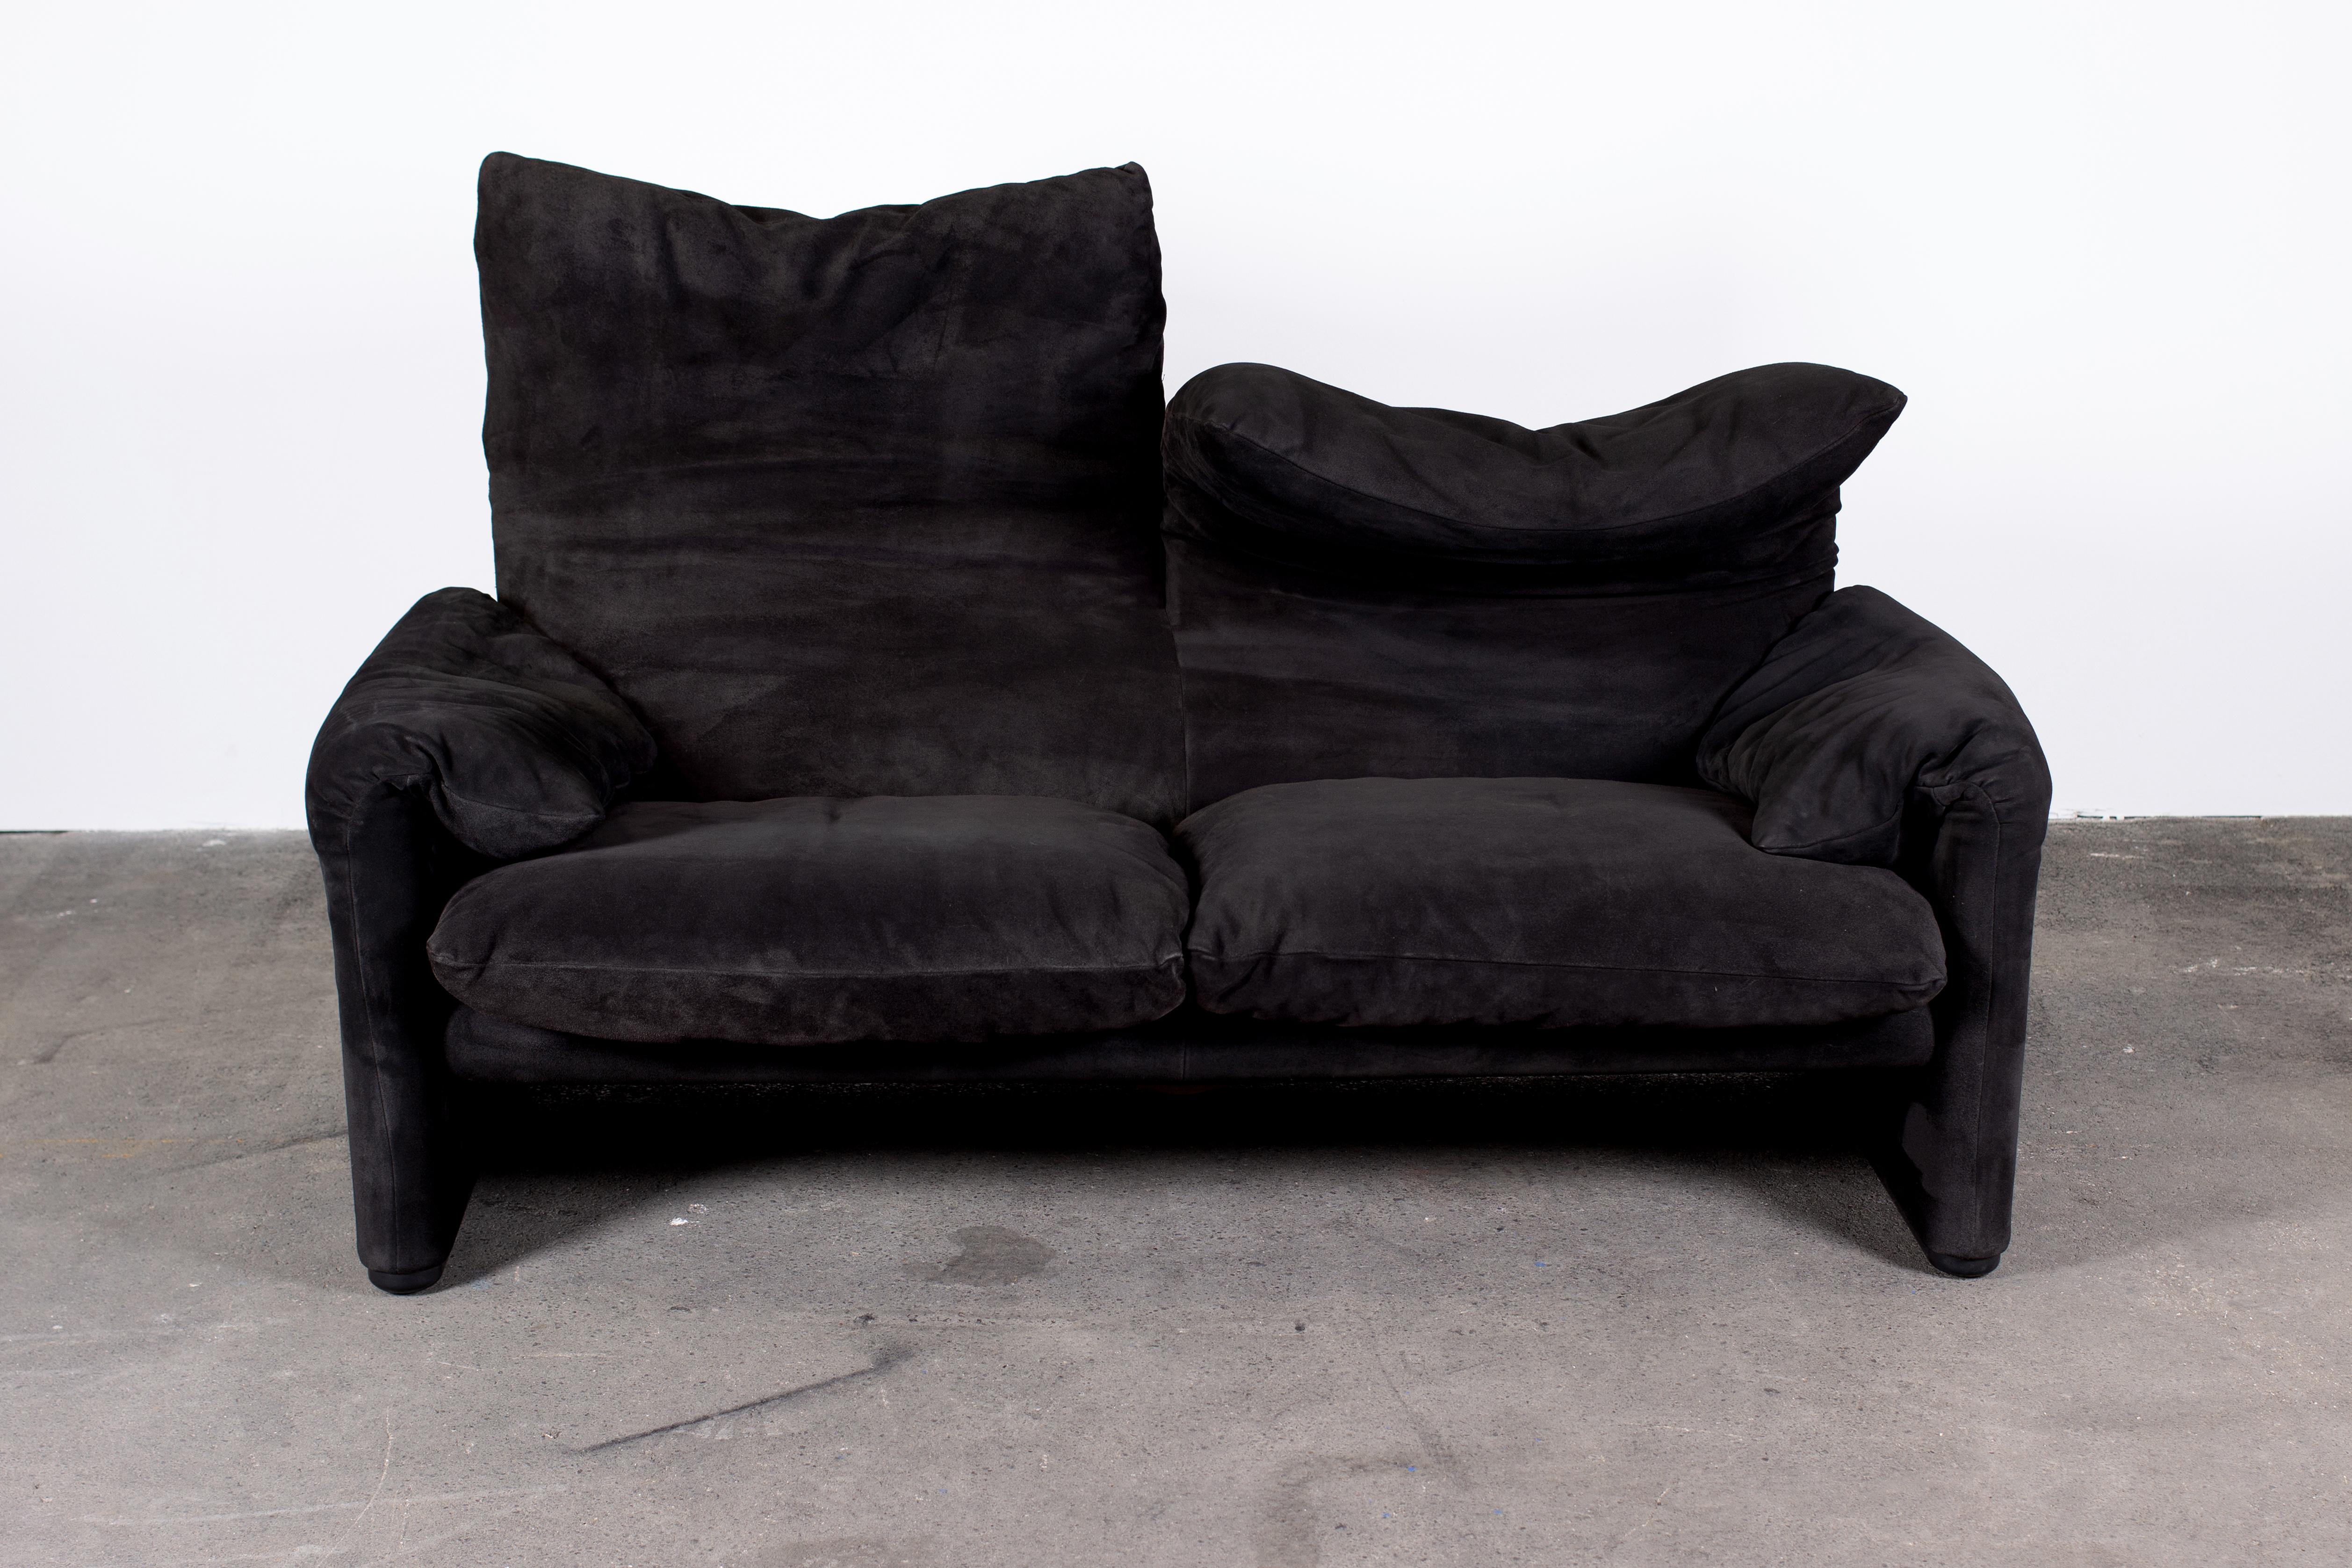 Pair of Black Suede 2-Seater Maralunga Sofas by Vico Magistretti for Cassina 16